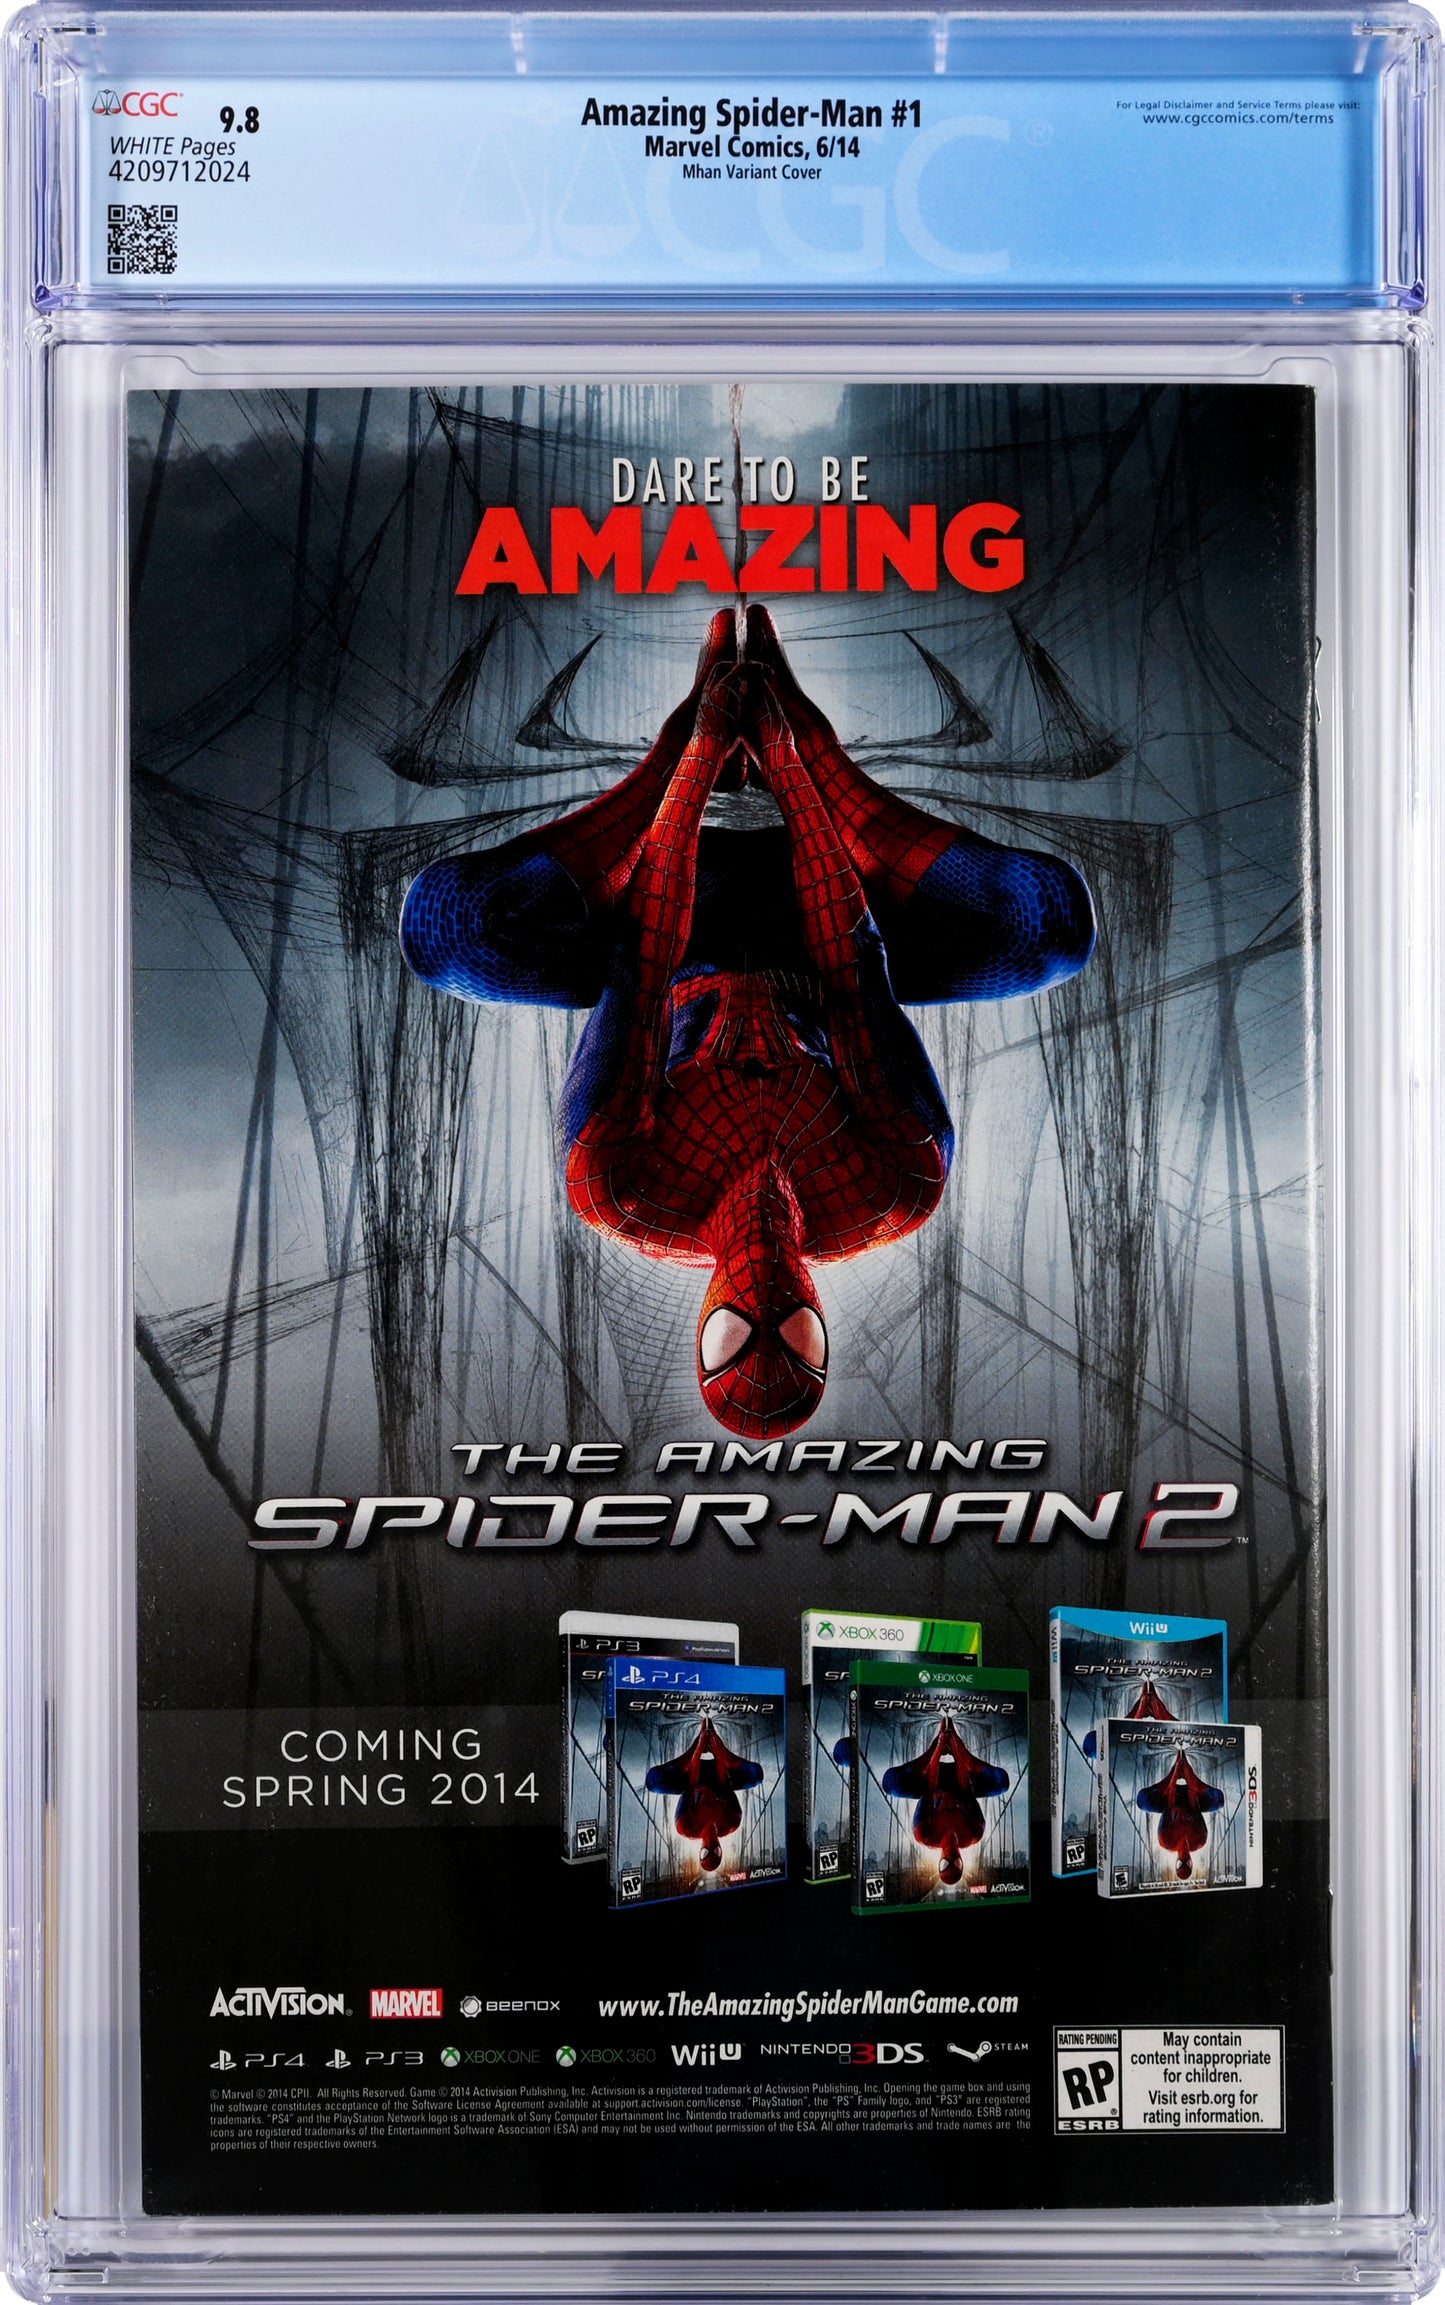 The Amazing Spider-Man #1 - CGC Graded 9.8 - Variant - 1st Appearance Cindy Moon